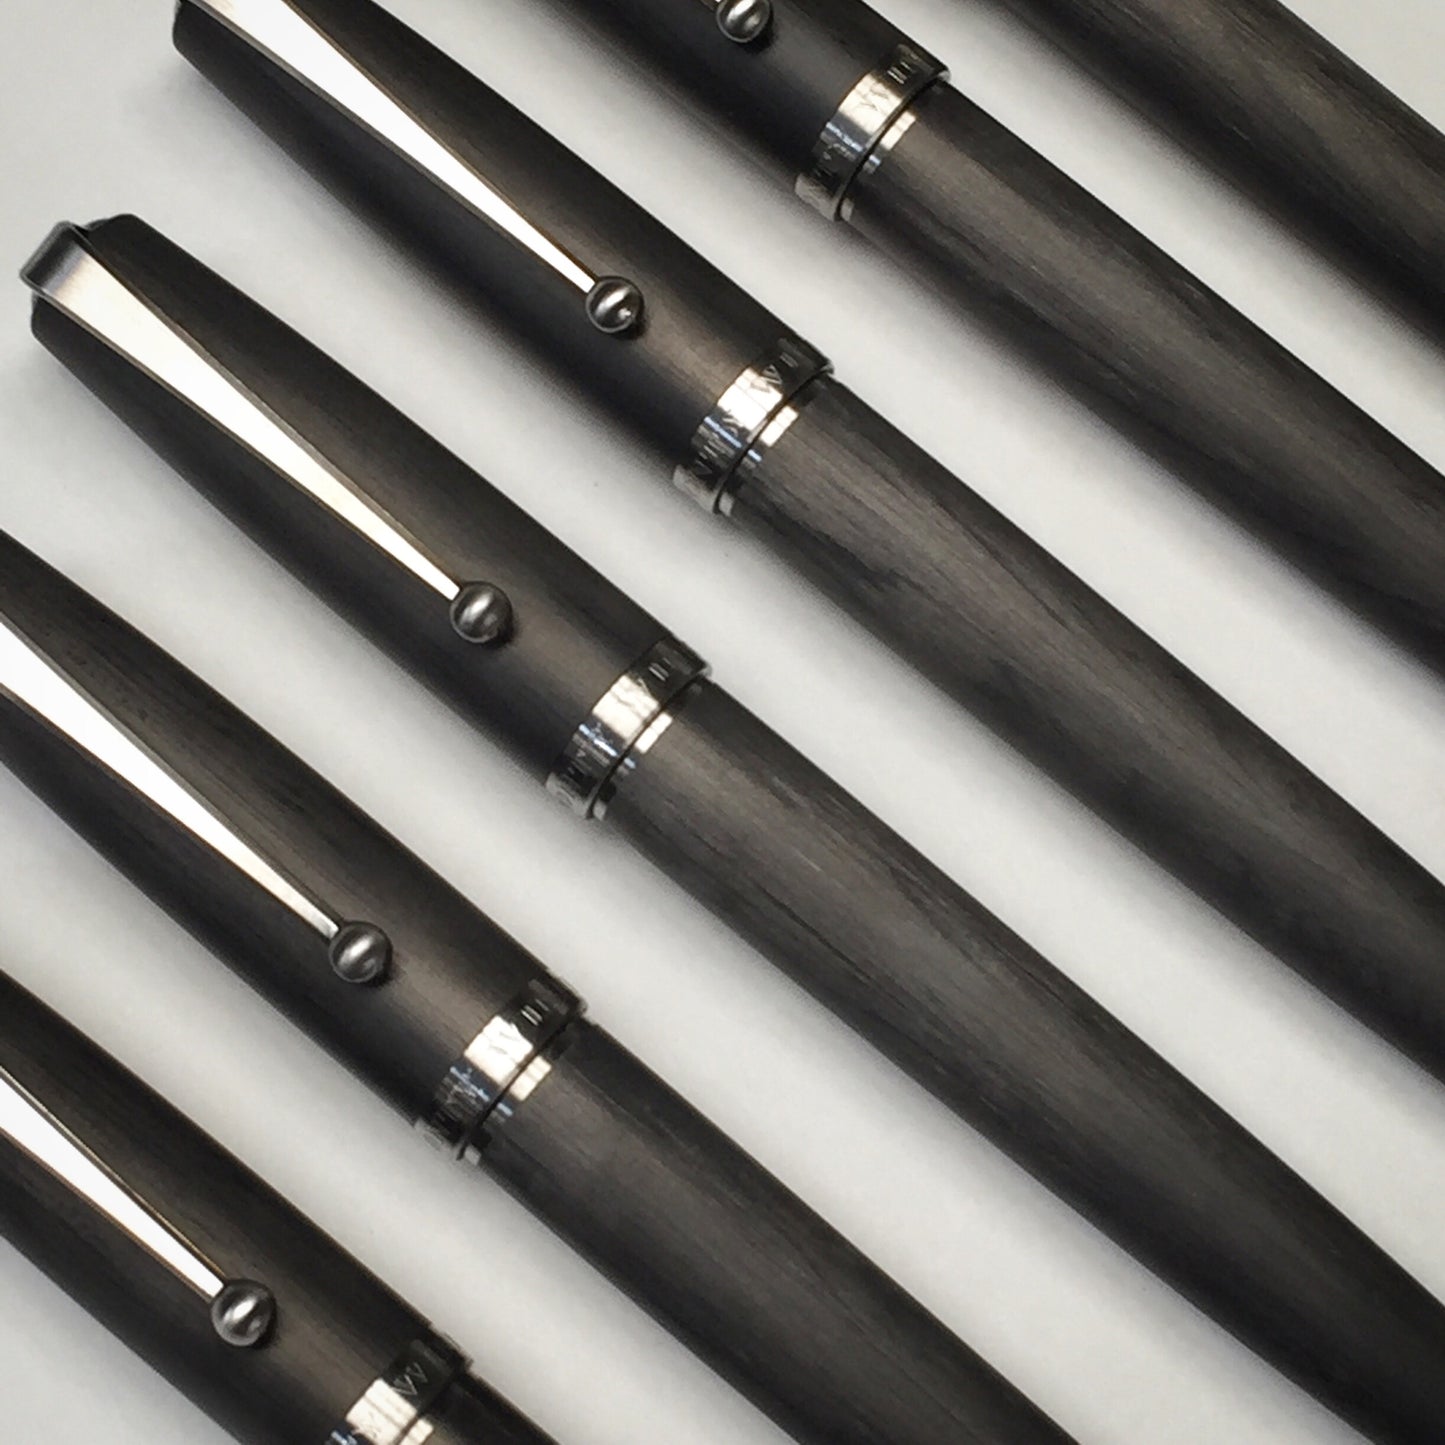 Titanium and Carbon Fiber Fountain Pen with Waterfall Clip